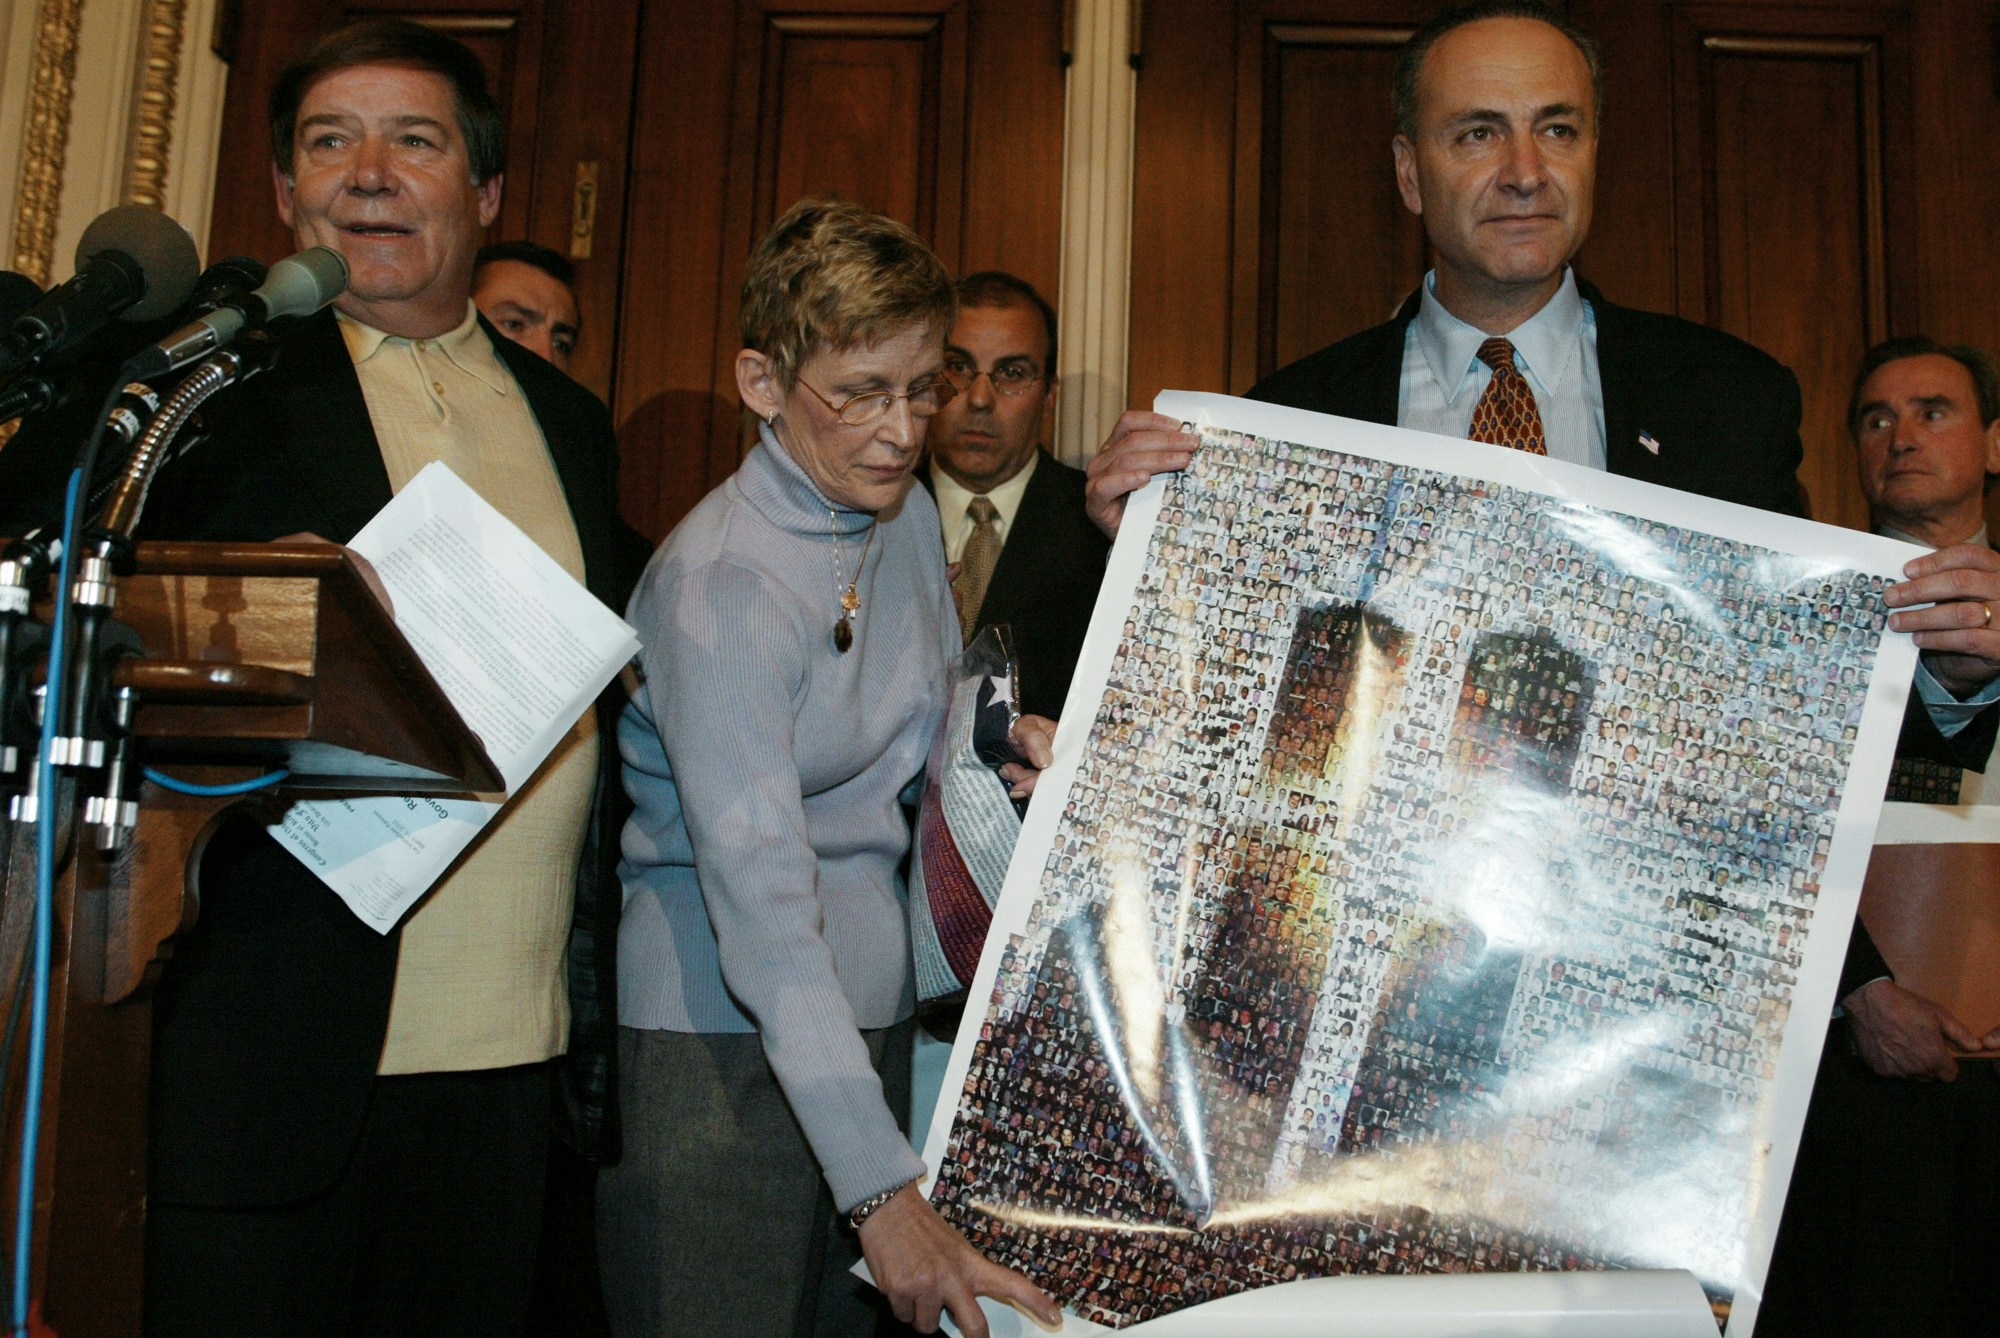 Bill Doyle, left, and Joan Molinaro, center, both from Staten Island, N.Y., parents of victims, present a poster of the World Trade Center bearing photographs of all the victims of the Sept. 11 terrorist attacks to Senator Charles Schumer, D-N.Y., during a news conference on terrorist financing on Capitol Hill Wednesday, March 19, 2003. Schumer said that new documents in possession by the Justice Department linking some of Saudi Arabia's most influential families to Al Qaeda should be made available tohelp victims' families prosecute those responsible for the Sept. 11 tragedy. Man rear center is John D'Amato, and rear right is Ronald Motley, attorney for the Sept. 11 families of victims. (AP Photo/Charles Dharapak)